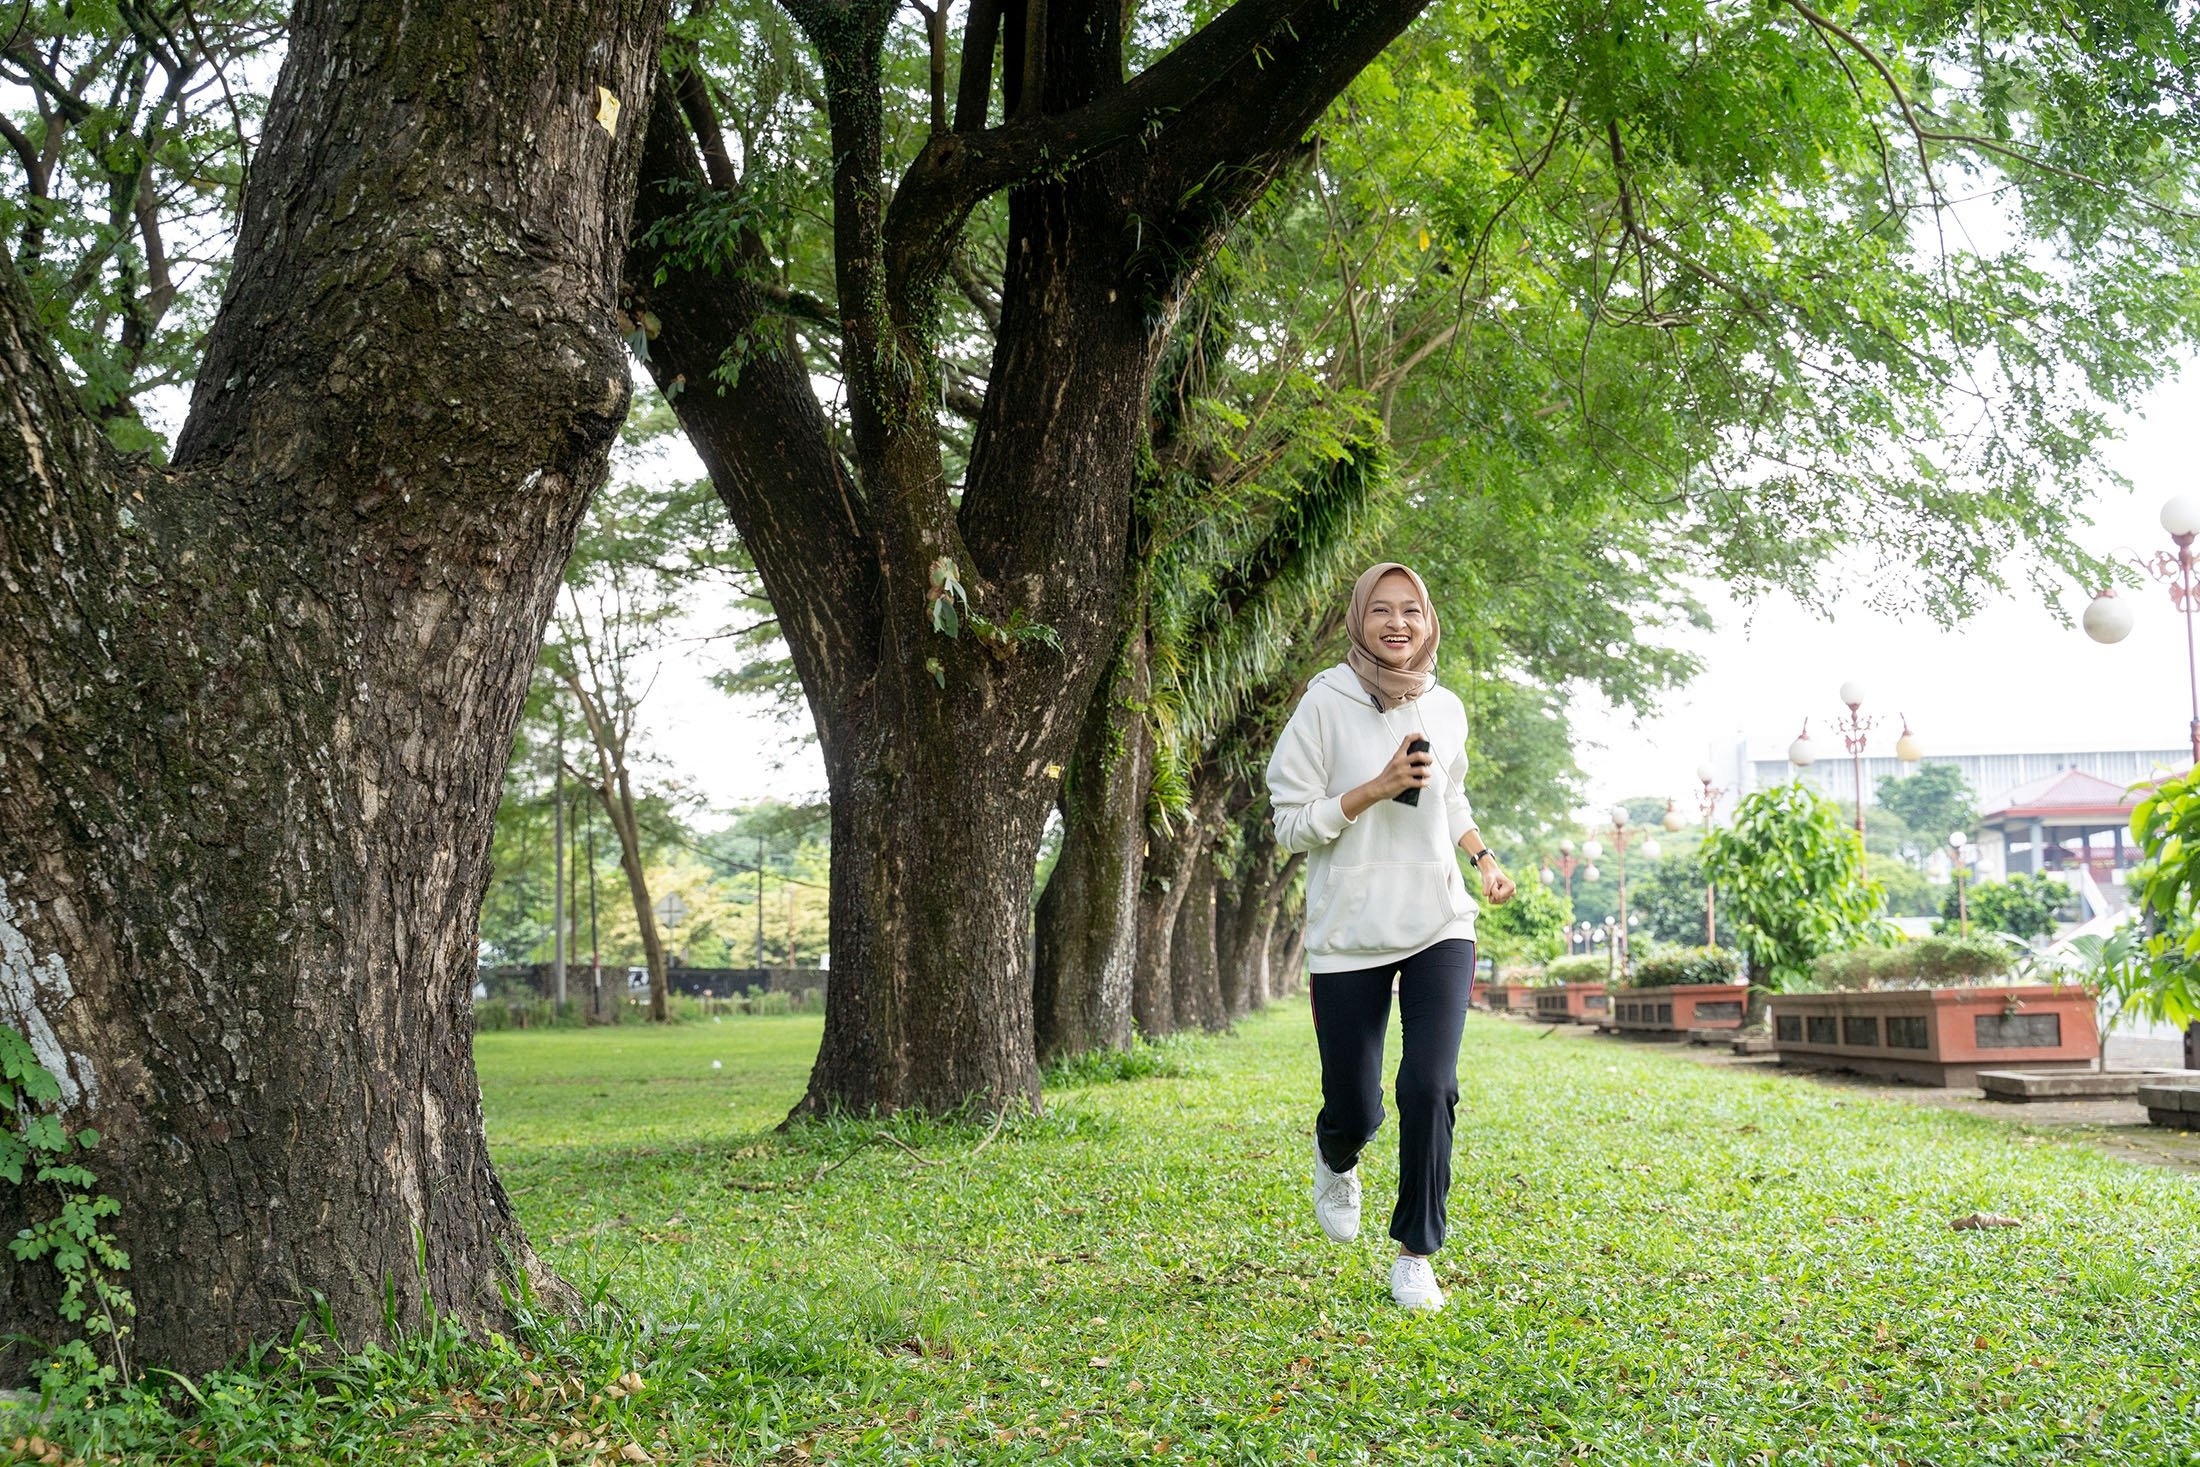 Going for a walk is a great way to help digestion and beat the bloat post-iftar. (Shutterstock Photo)